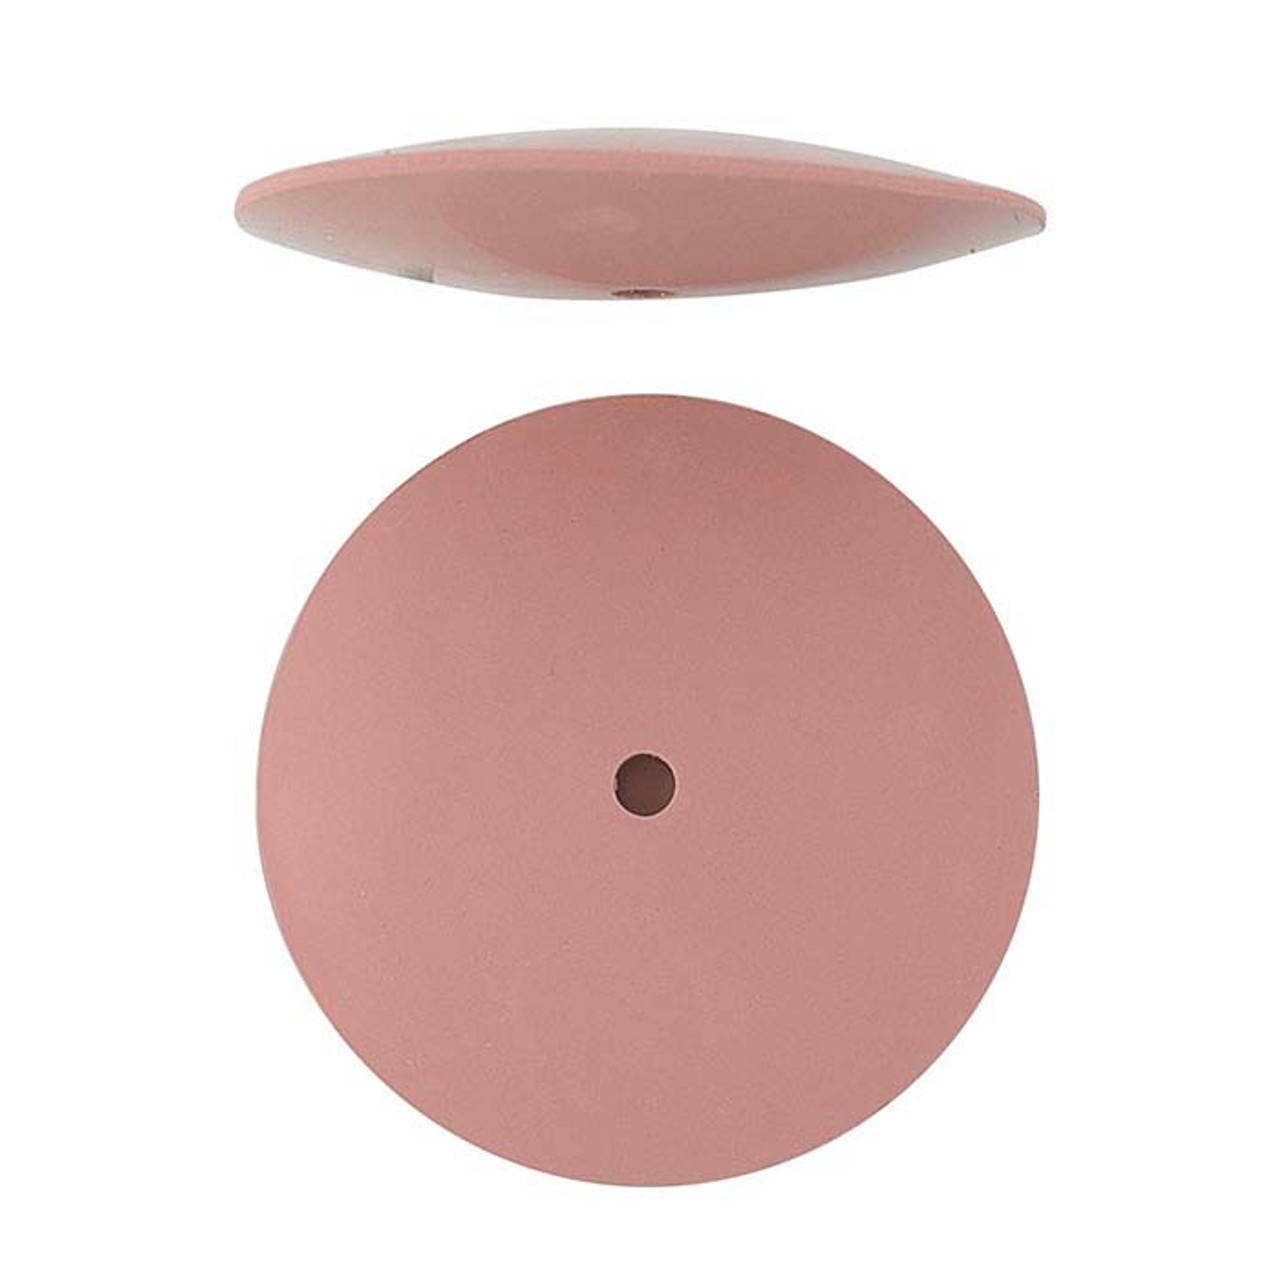 Silicone Polishing Wheel, Square Edge - Pink 7/8 Extra Fine, Pack of 2